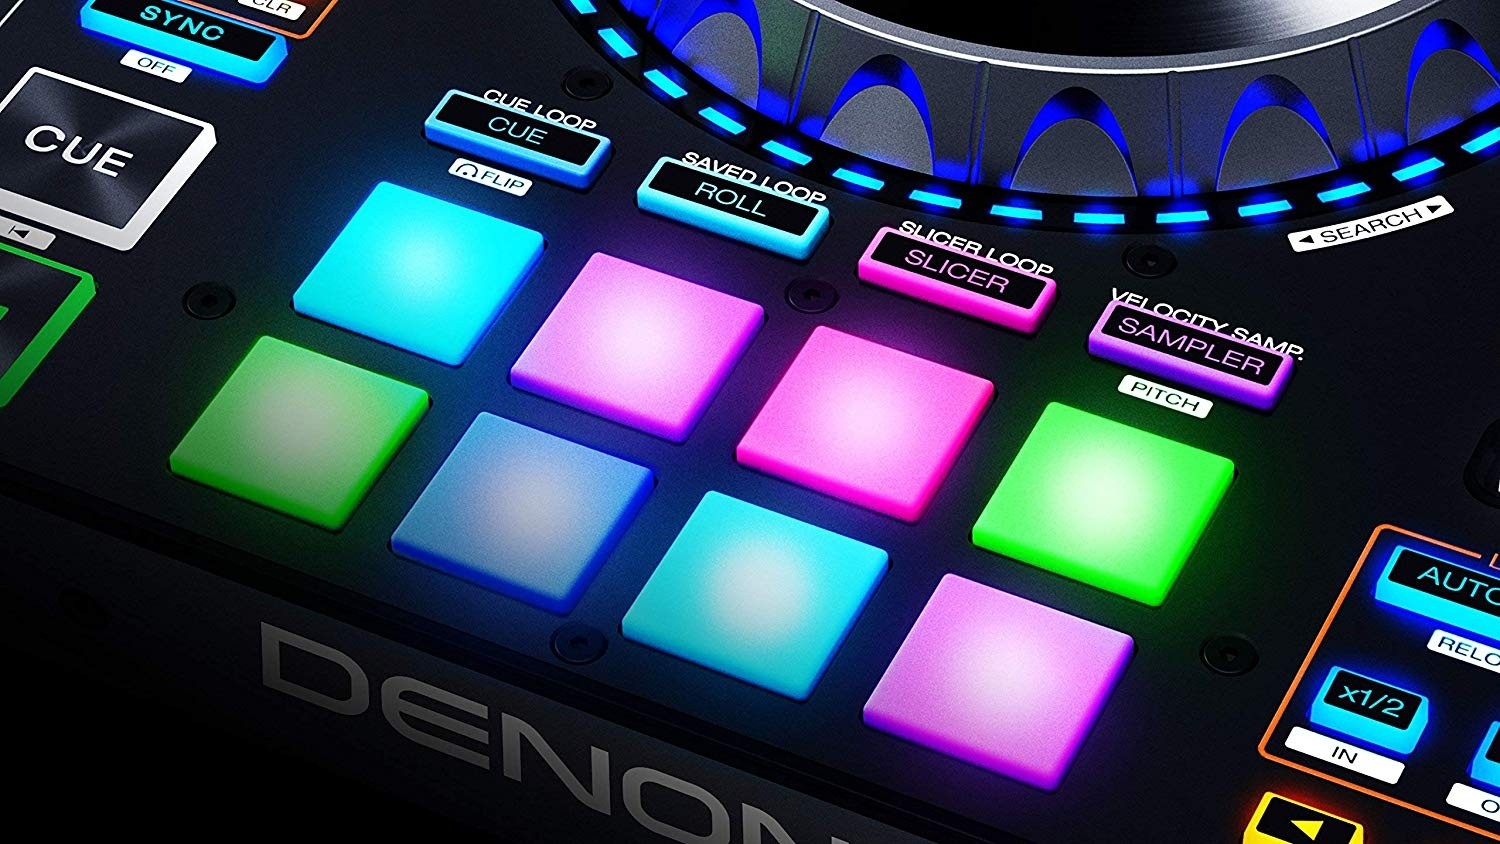 Denon DJ Premium 4 Channel DJ Controller & Mixer With Dual USB Audio Interfaces And Full Serato DJ Download. MC7000 Buy, Best Price. Global Shipping